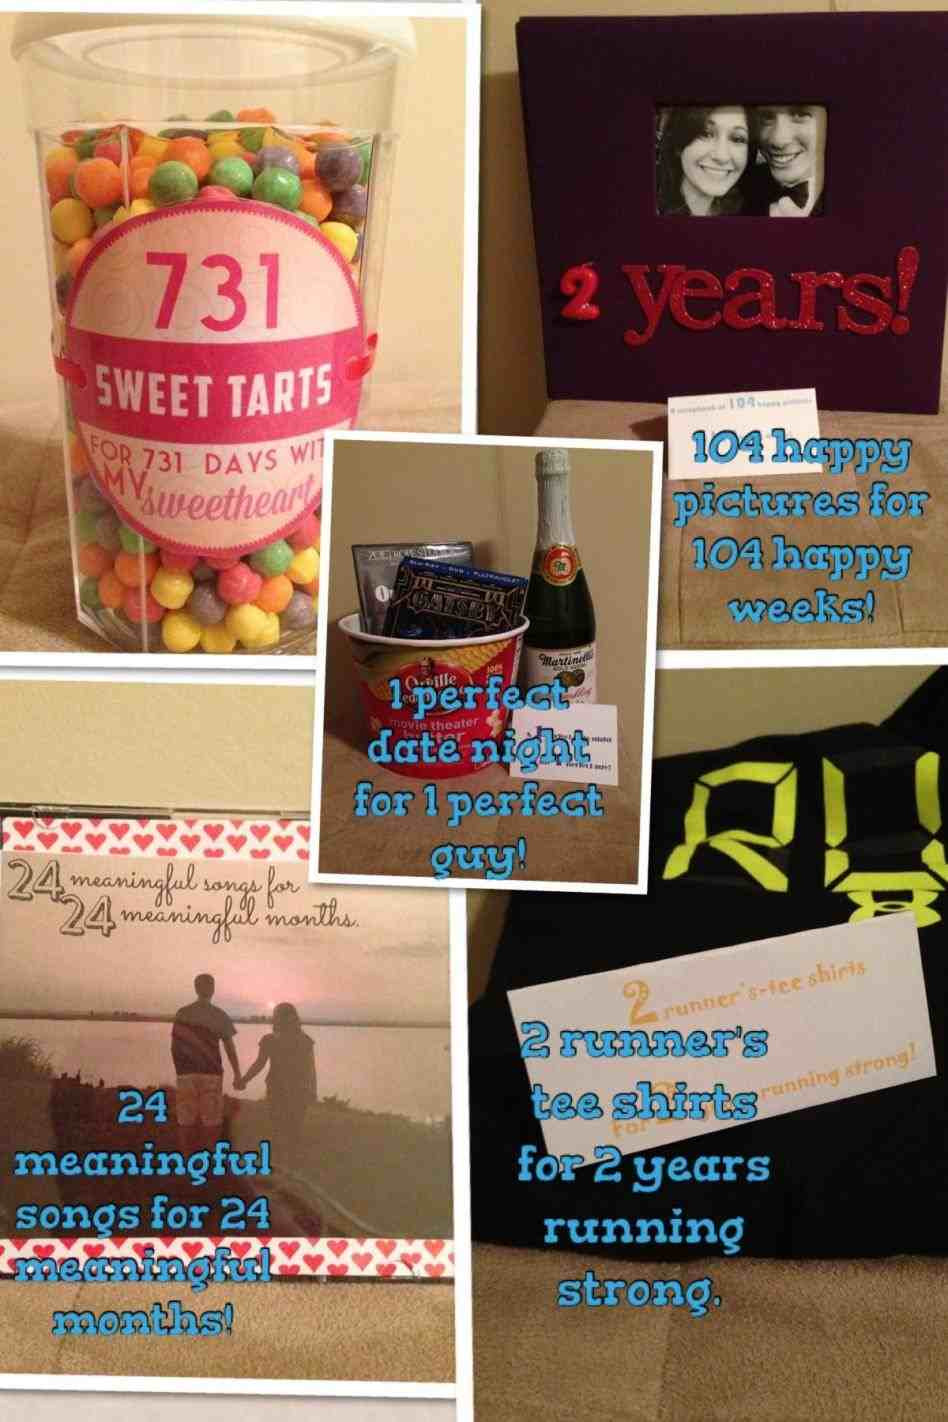 2 Year Dating Anniversary Gift Ideas For Him
 More About anniversary ts for boyfriend of 3 years